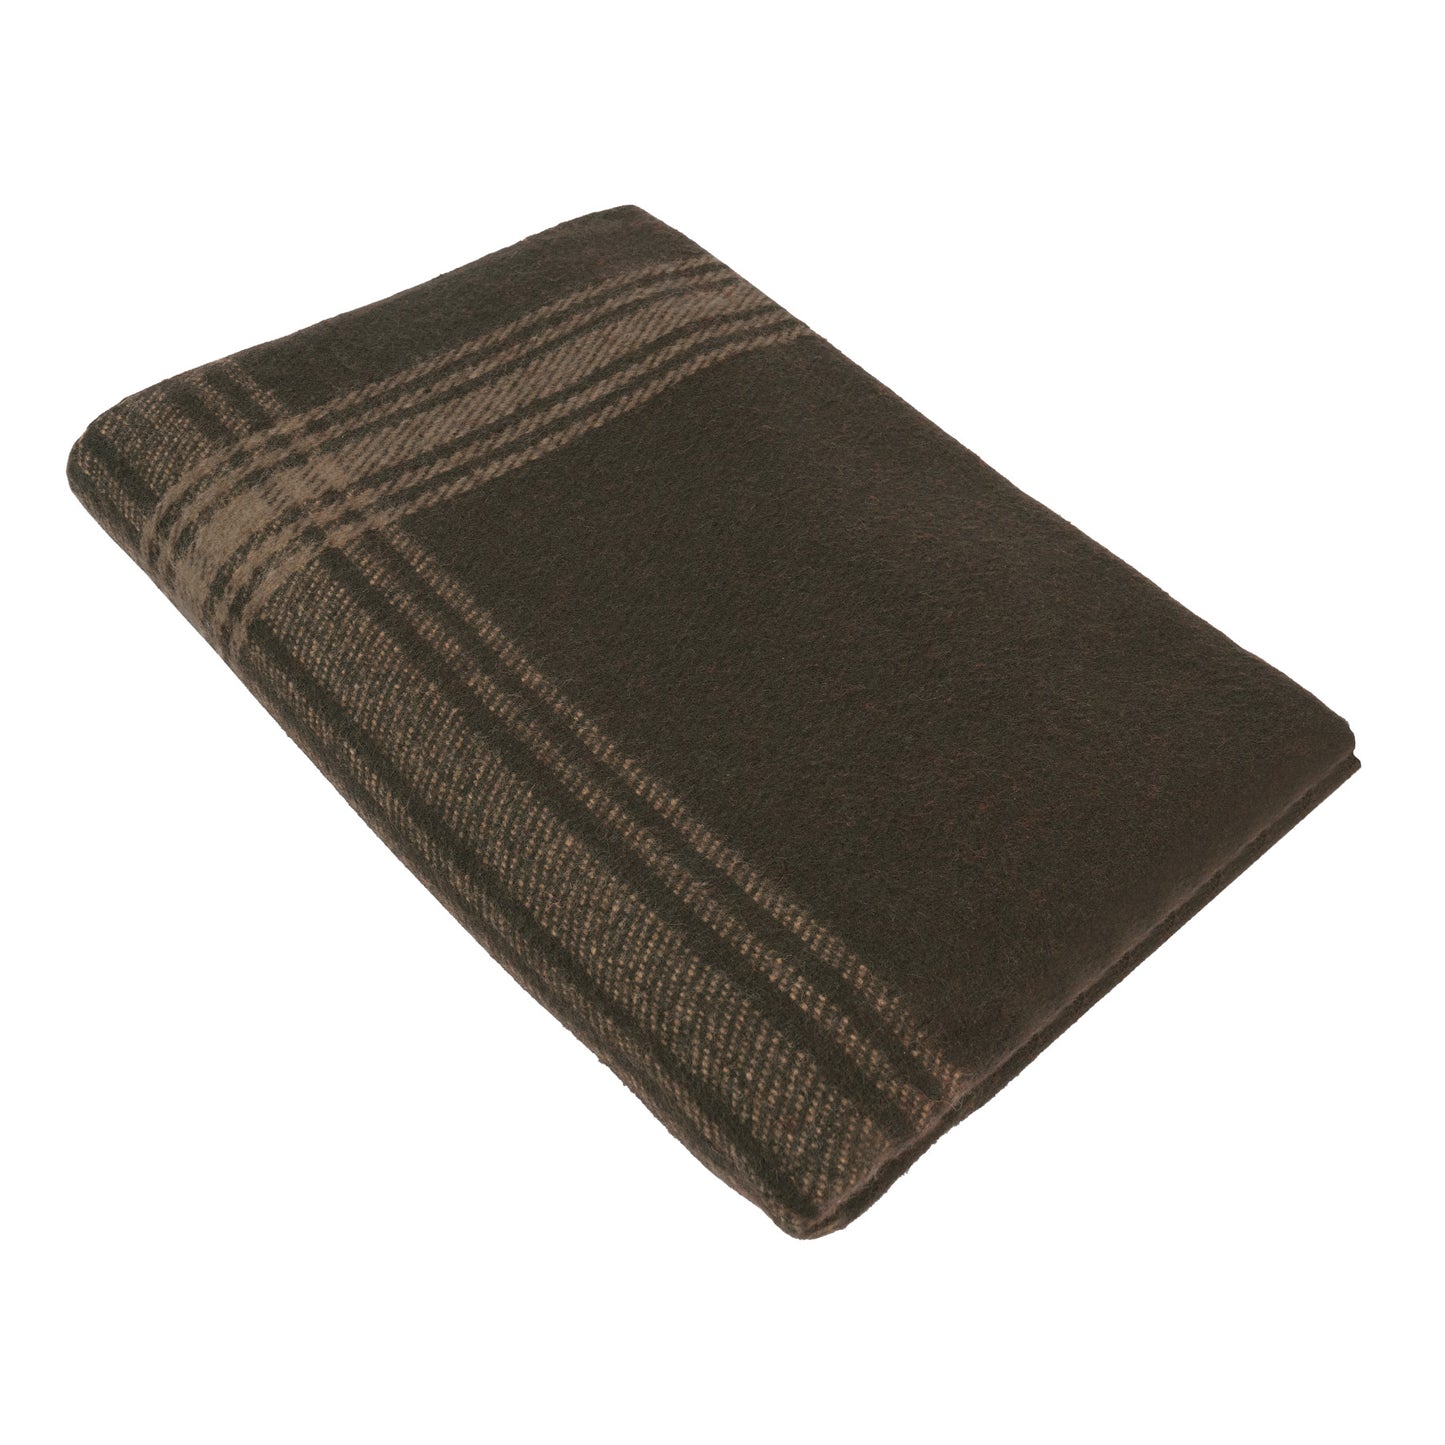 Rothco Striped Wool Blanket